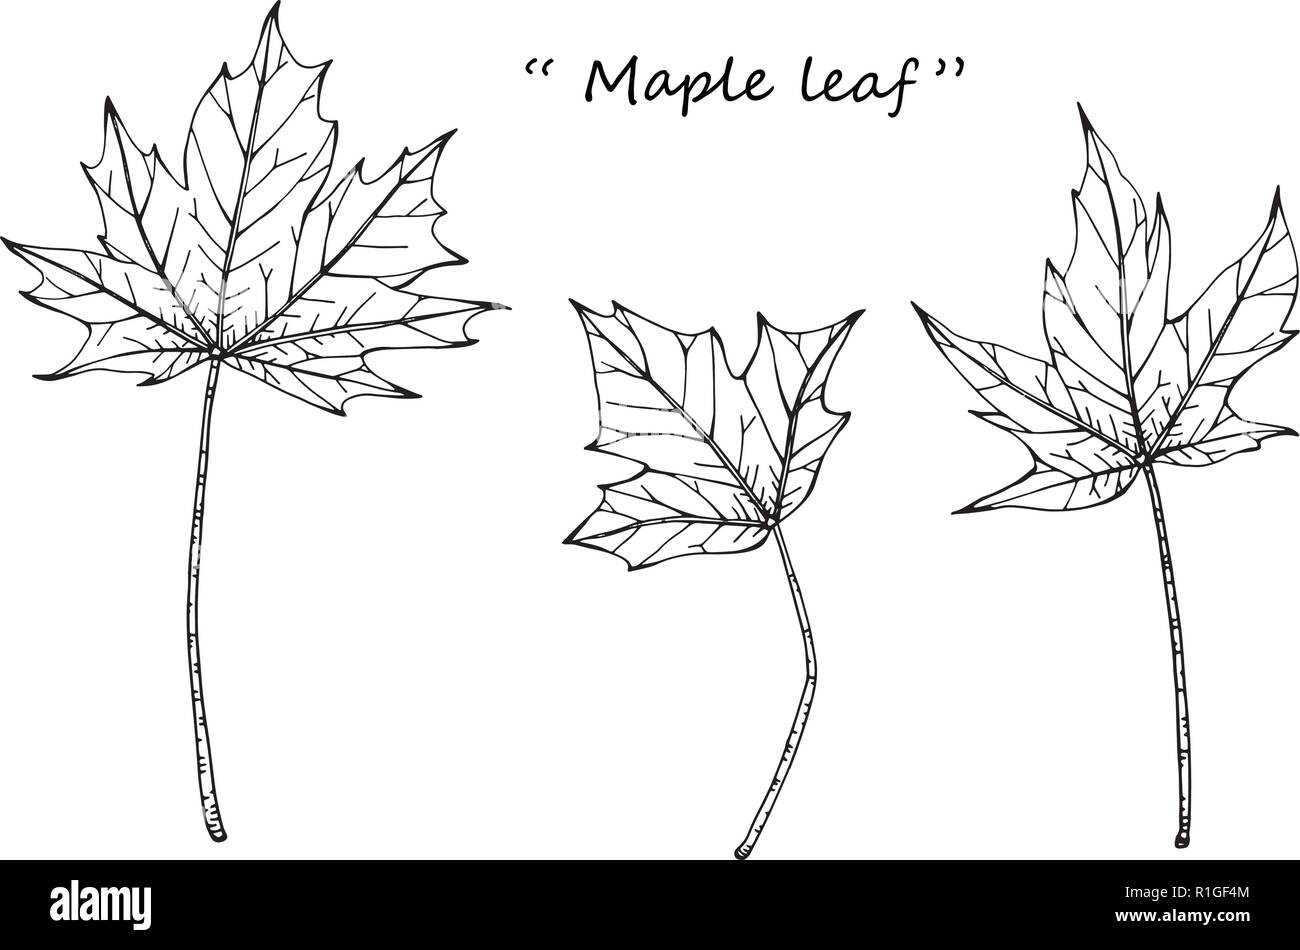 Maple leaf drawing illustration by hand drawn line art. Stock Vector